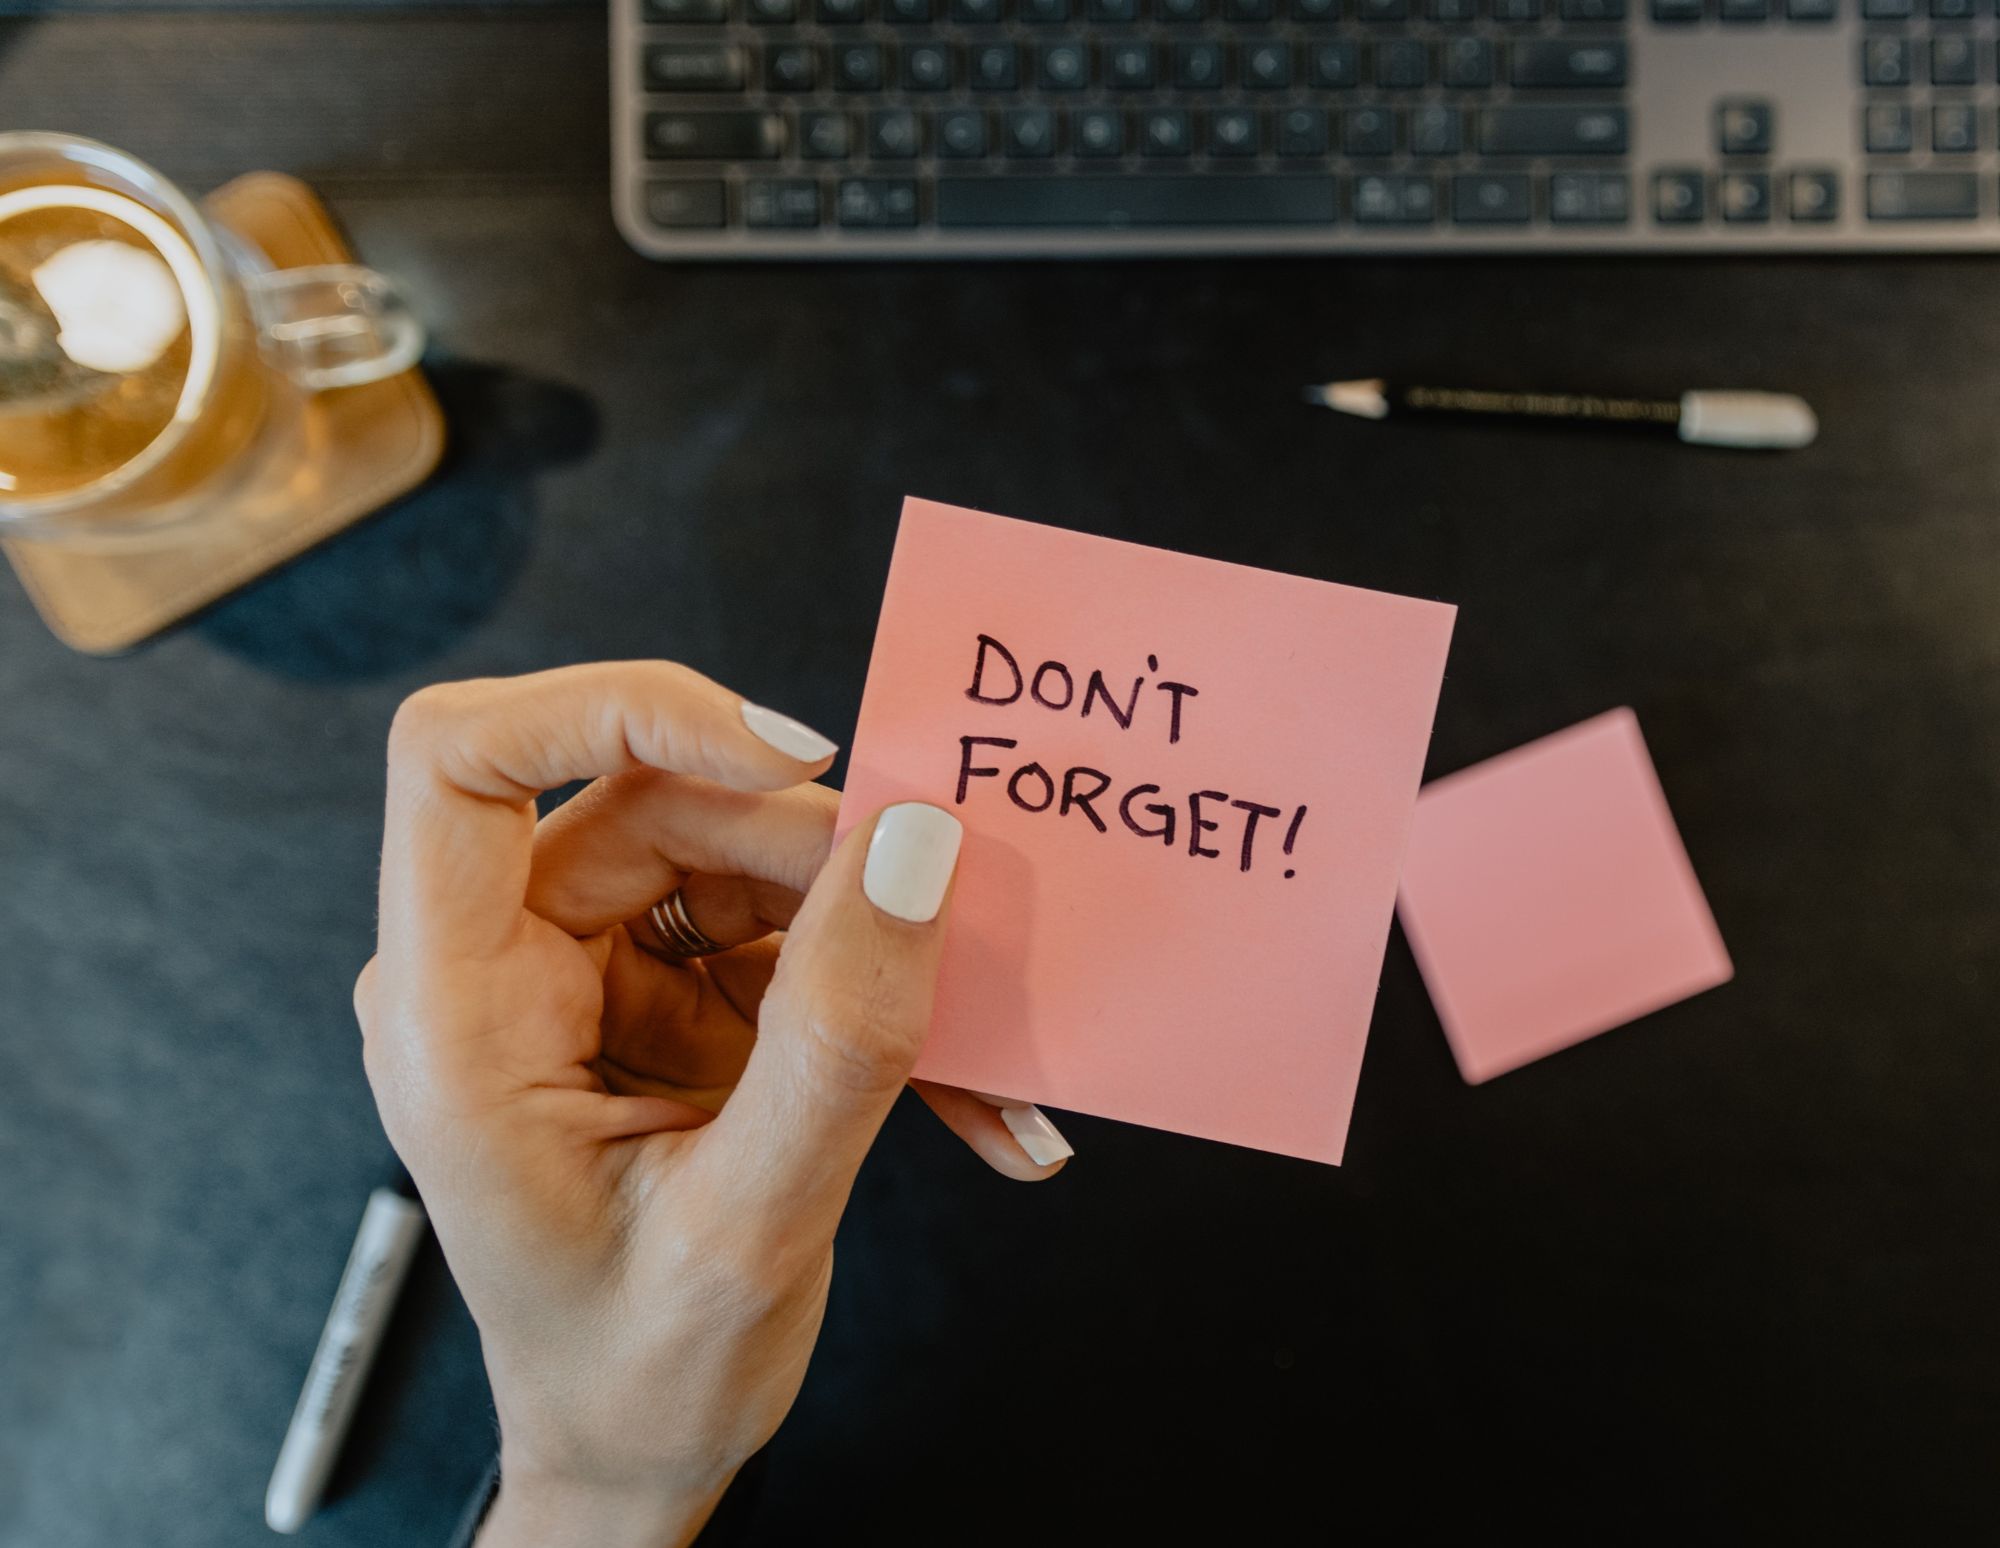 Don't forget on a post it note. Send your clients friendly reminder emails.